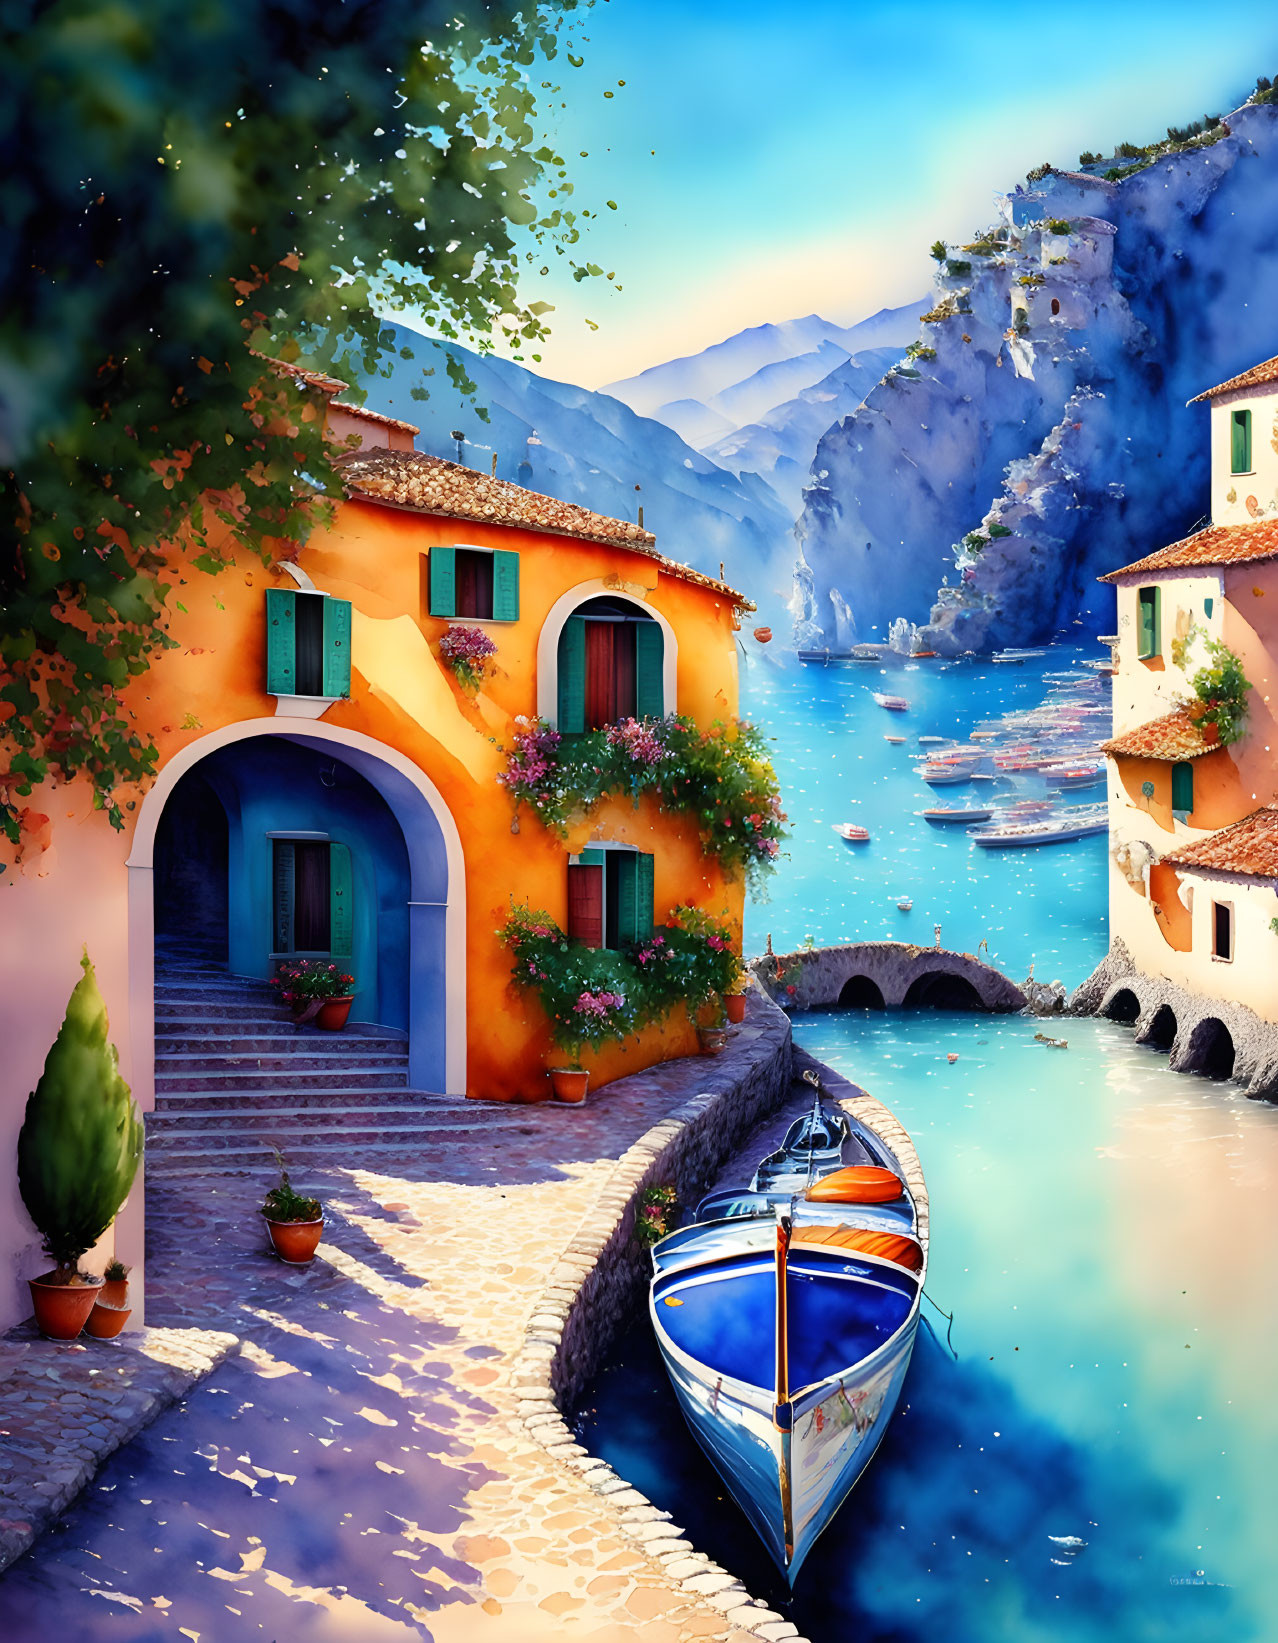 Colorful Mediterranean Coastal Scene with Boat and Stone Houses